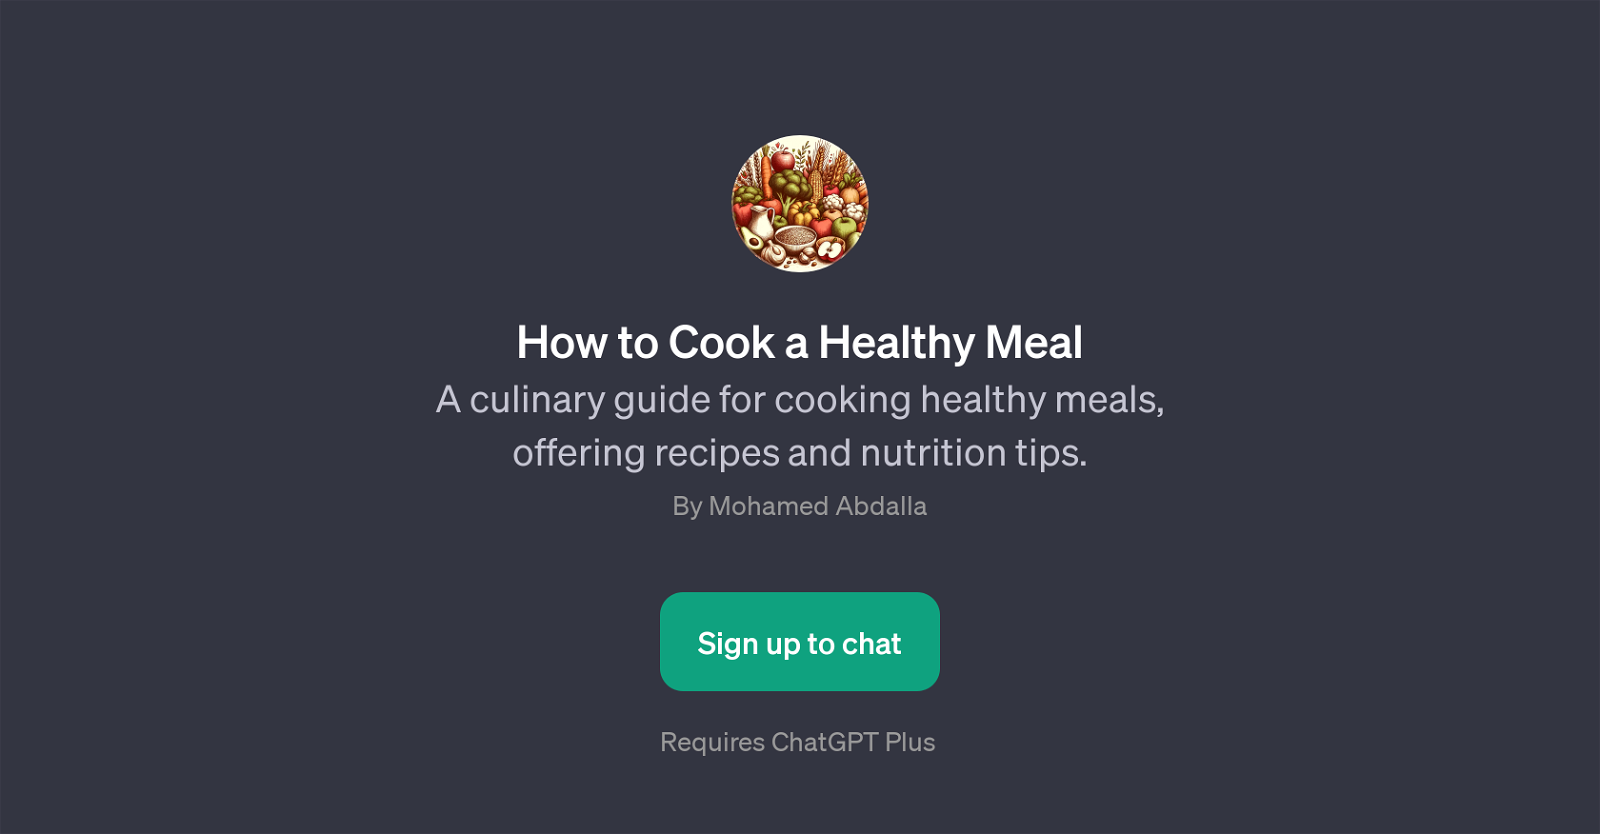 How to Cook a Healthy Meal website